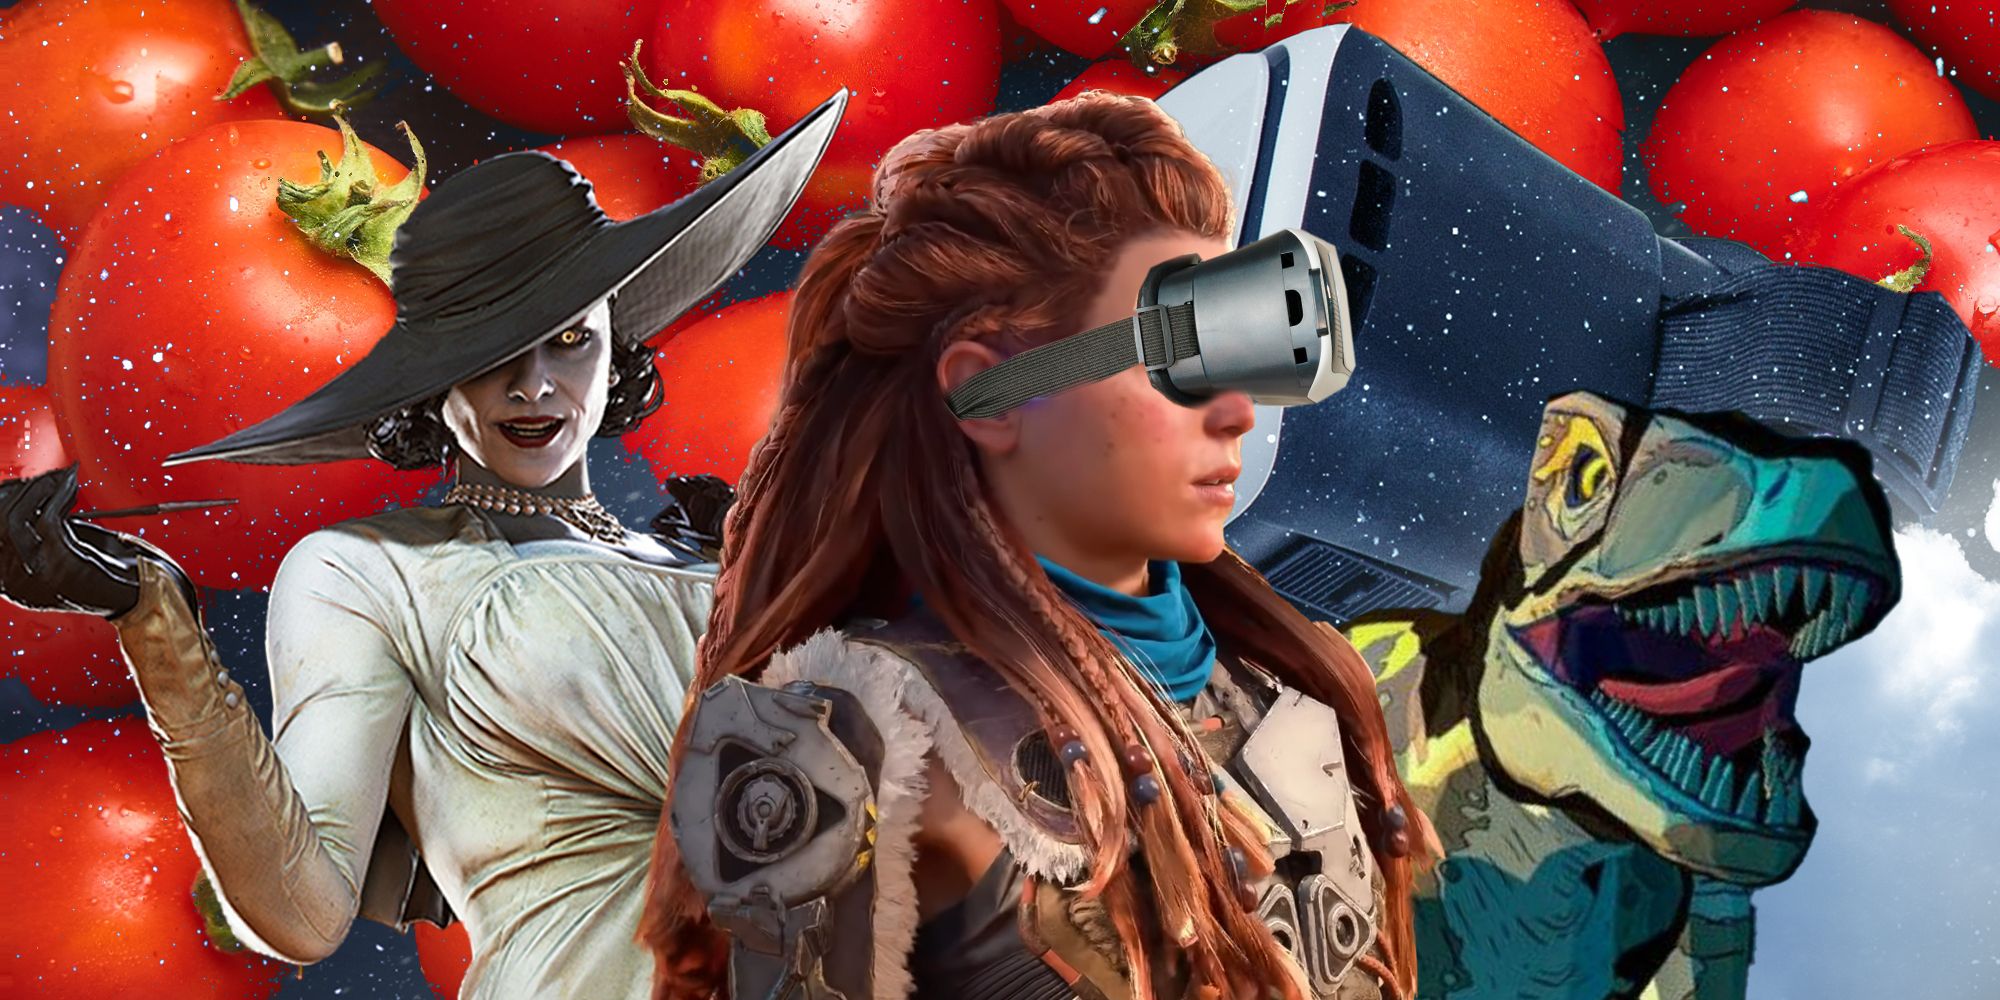 Lady Dimitrescu, Aloy, and the Jurassic Park VR dinosaur surrounded by tomatoes